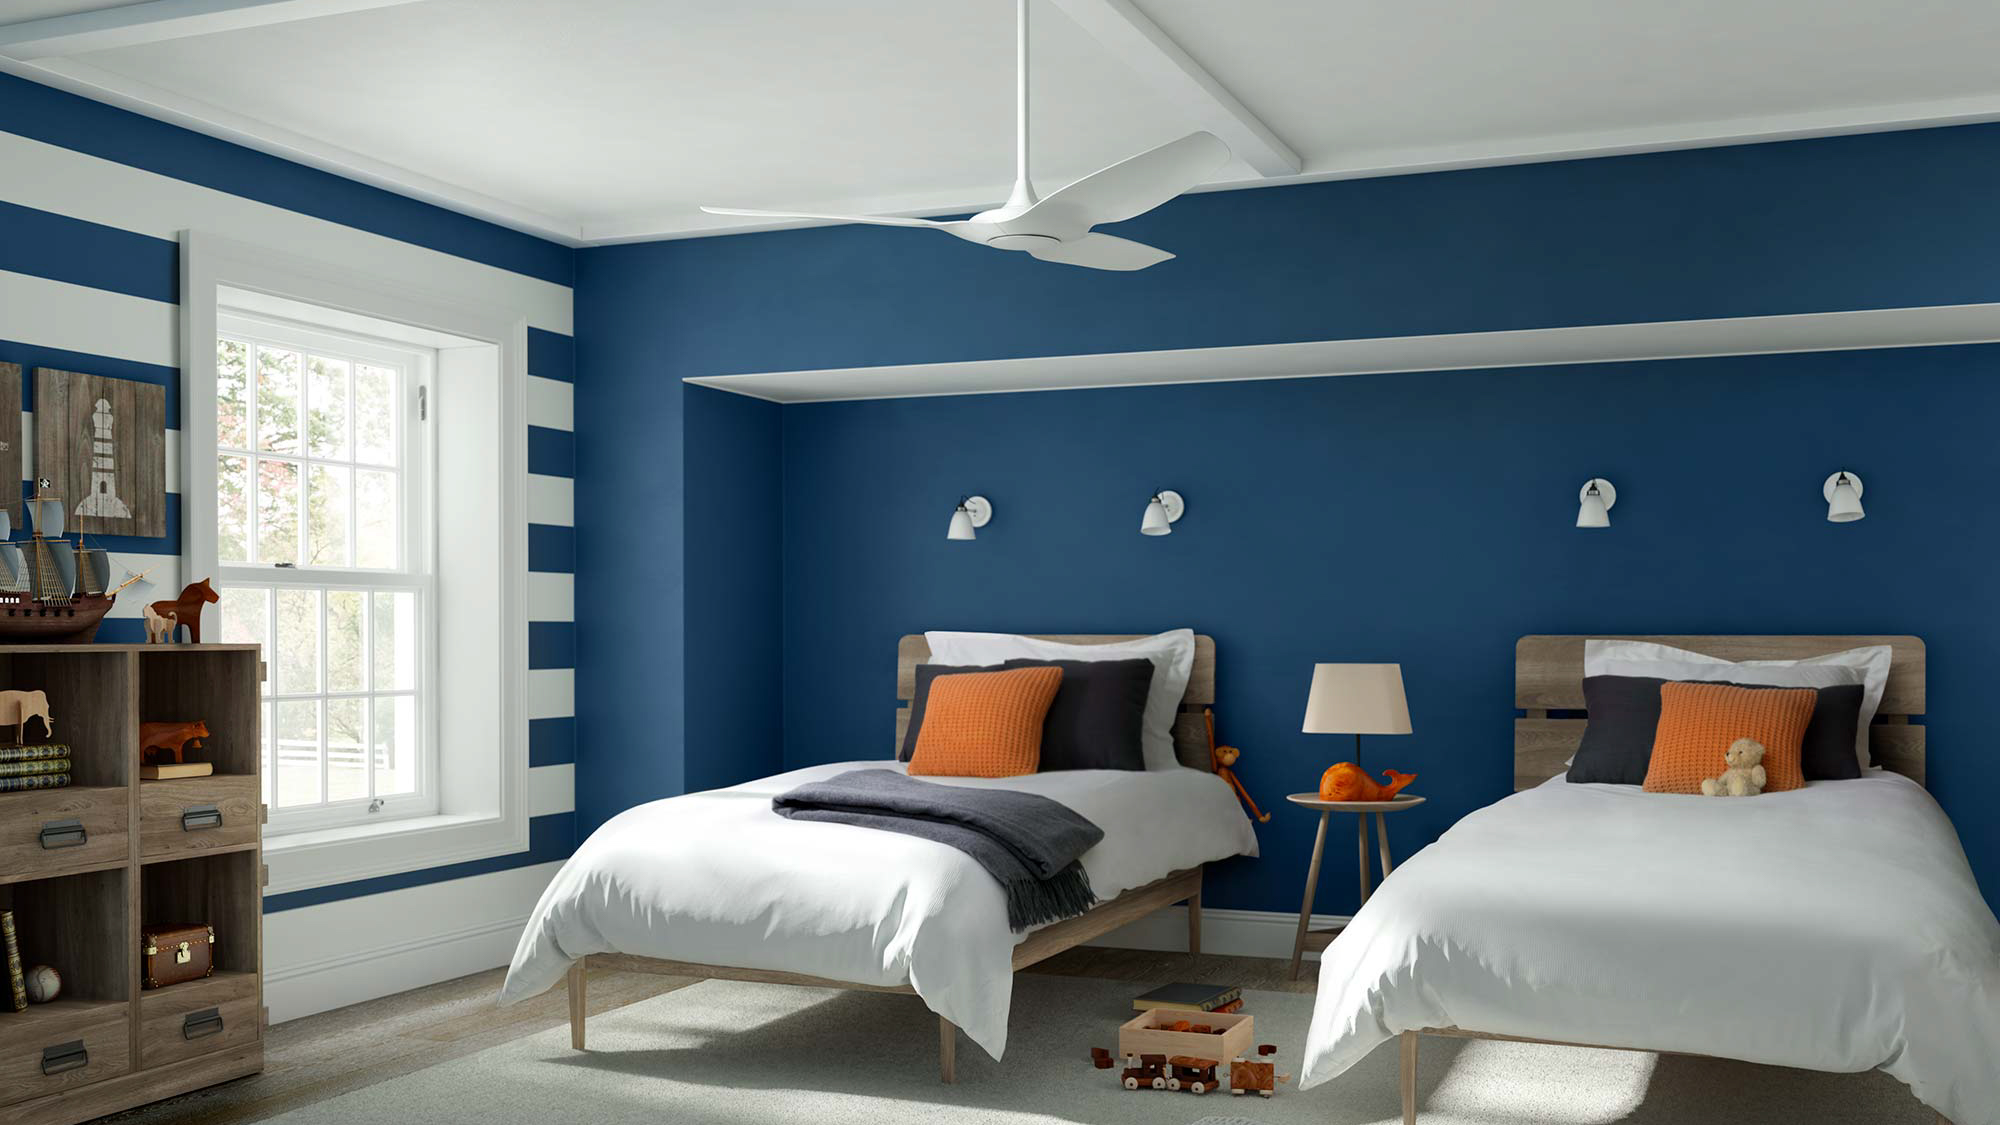 5 Smart Ceiling Fan Options For A Modern Home Digitized House